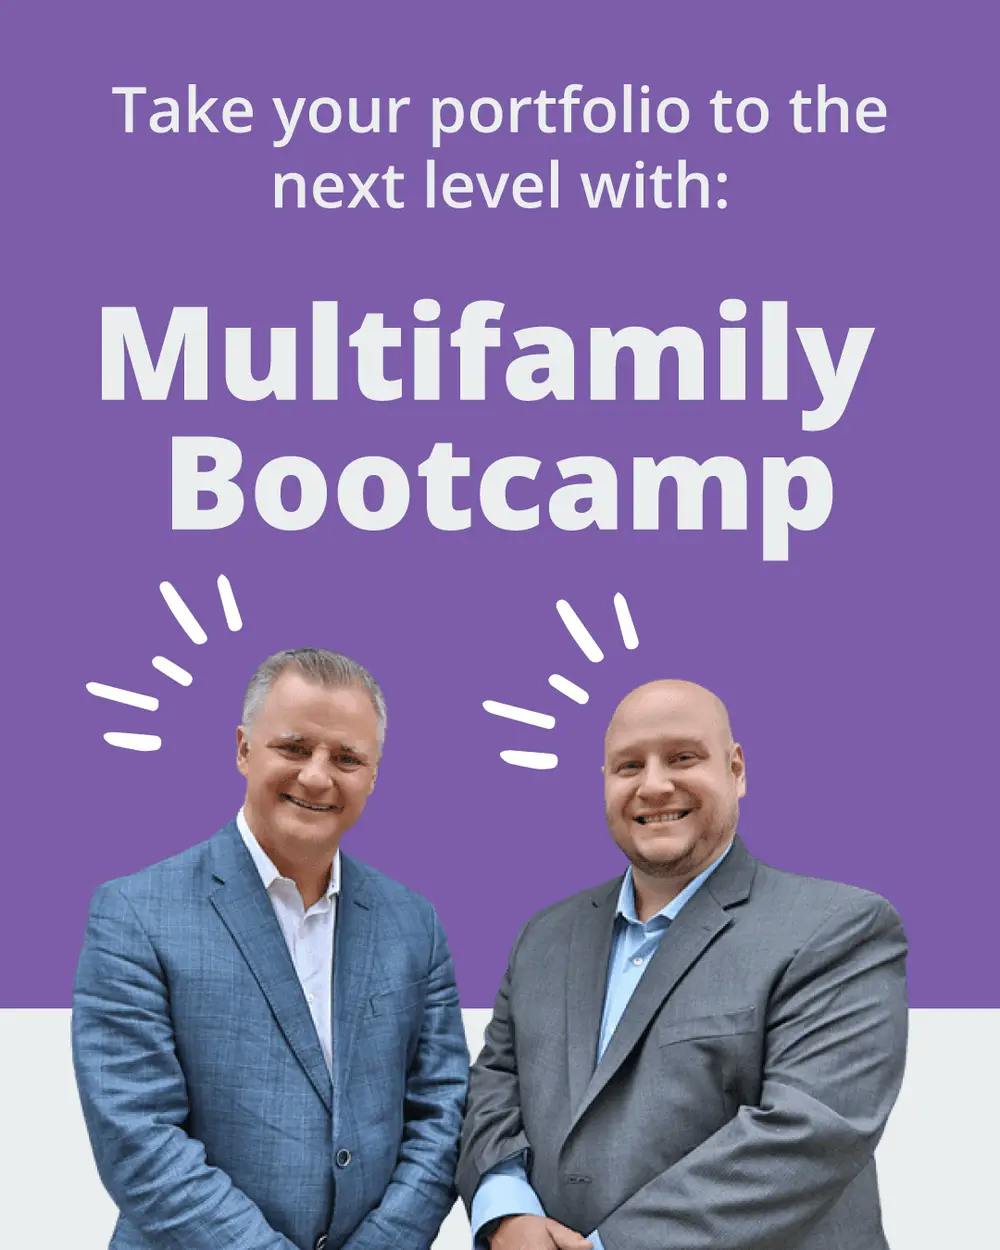 Multifamily Bootcamp (Self-guided) image